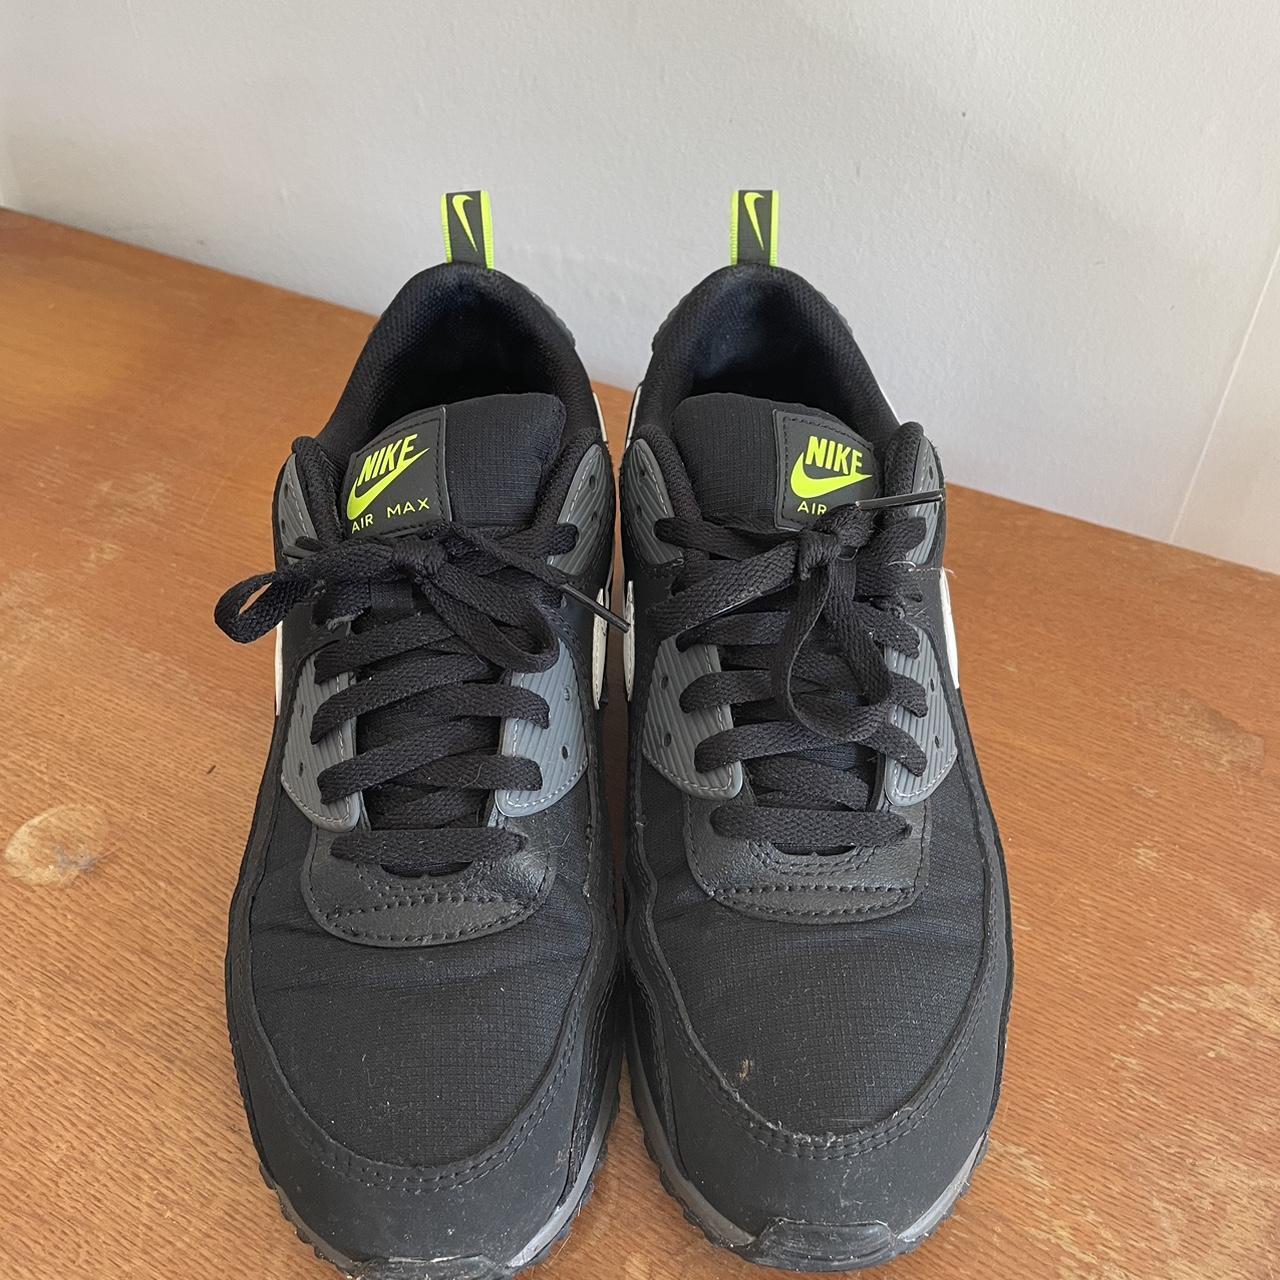 Nike air max 90s size 10 in good condition a bit of... - Depop